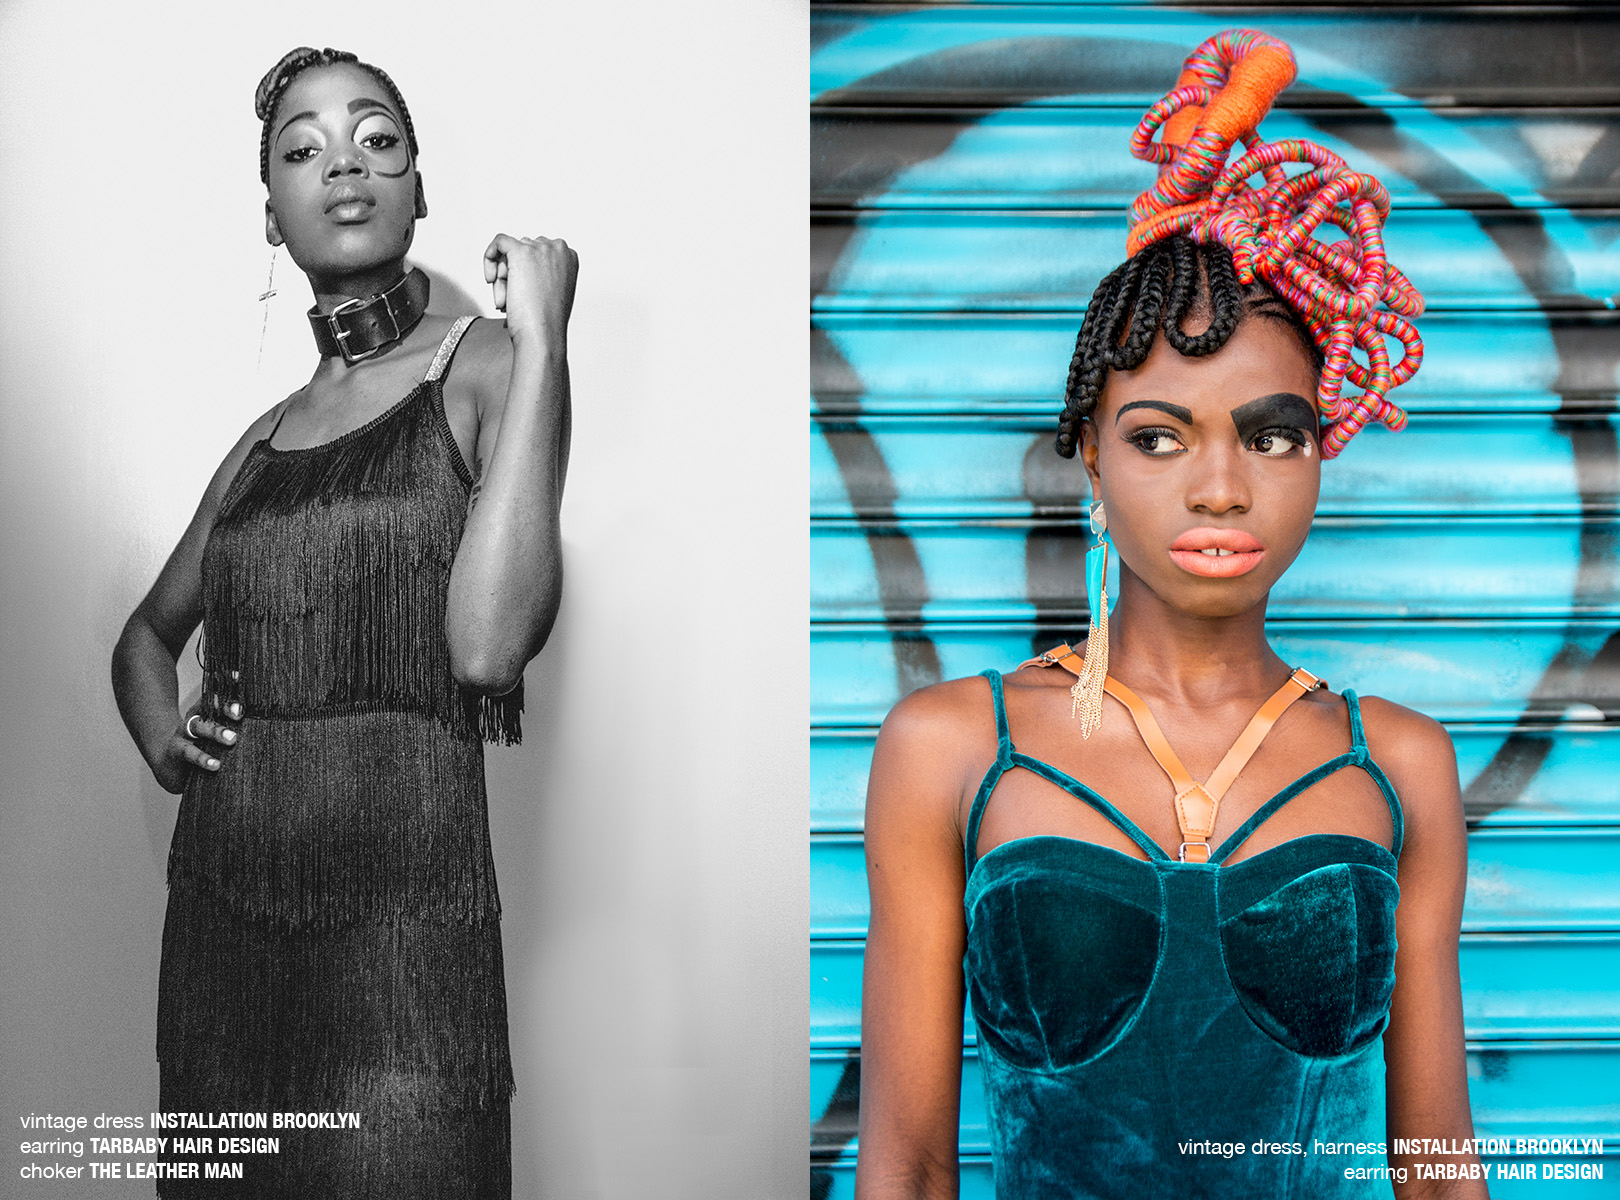 krullmag. two black models with intricate colorful braided hair